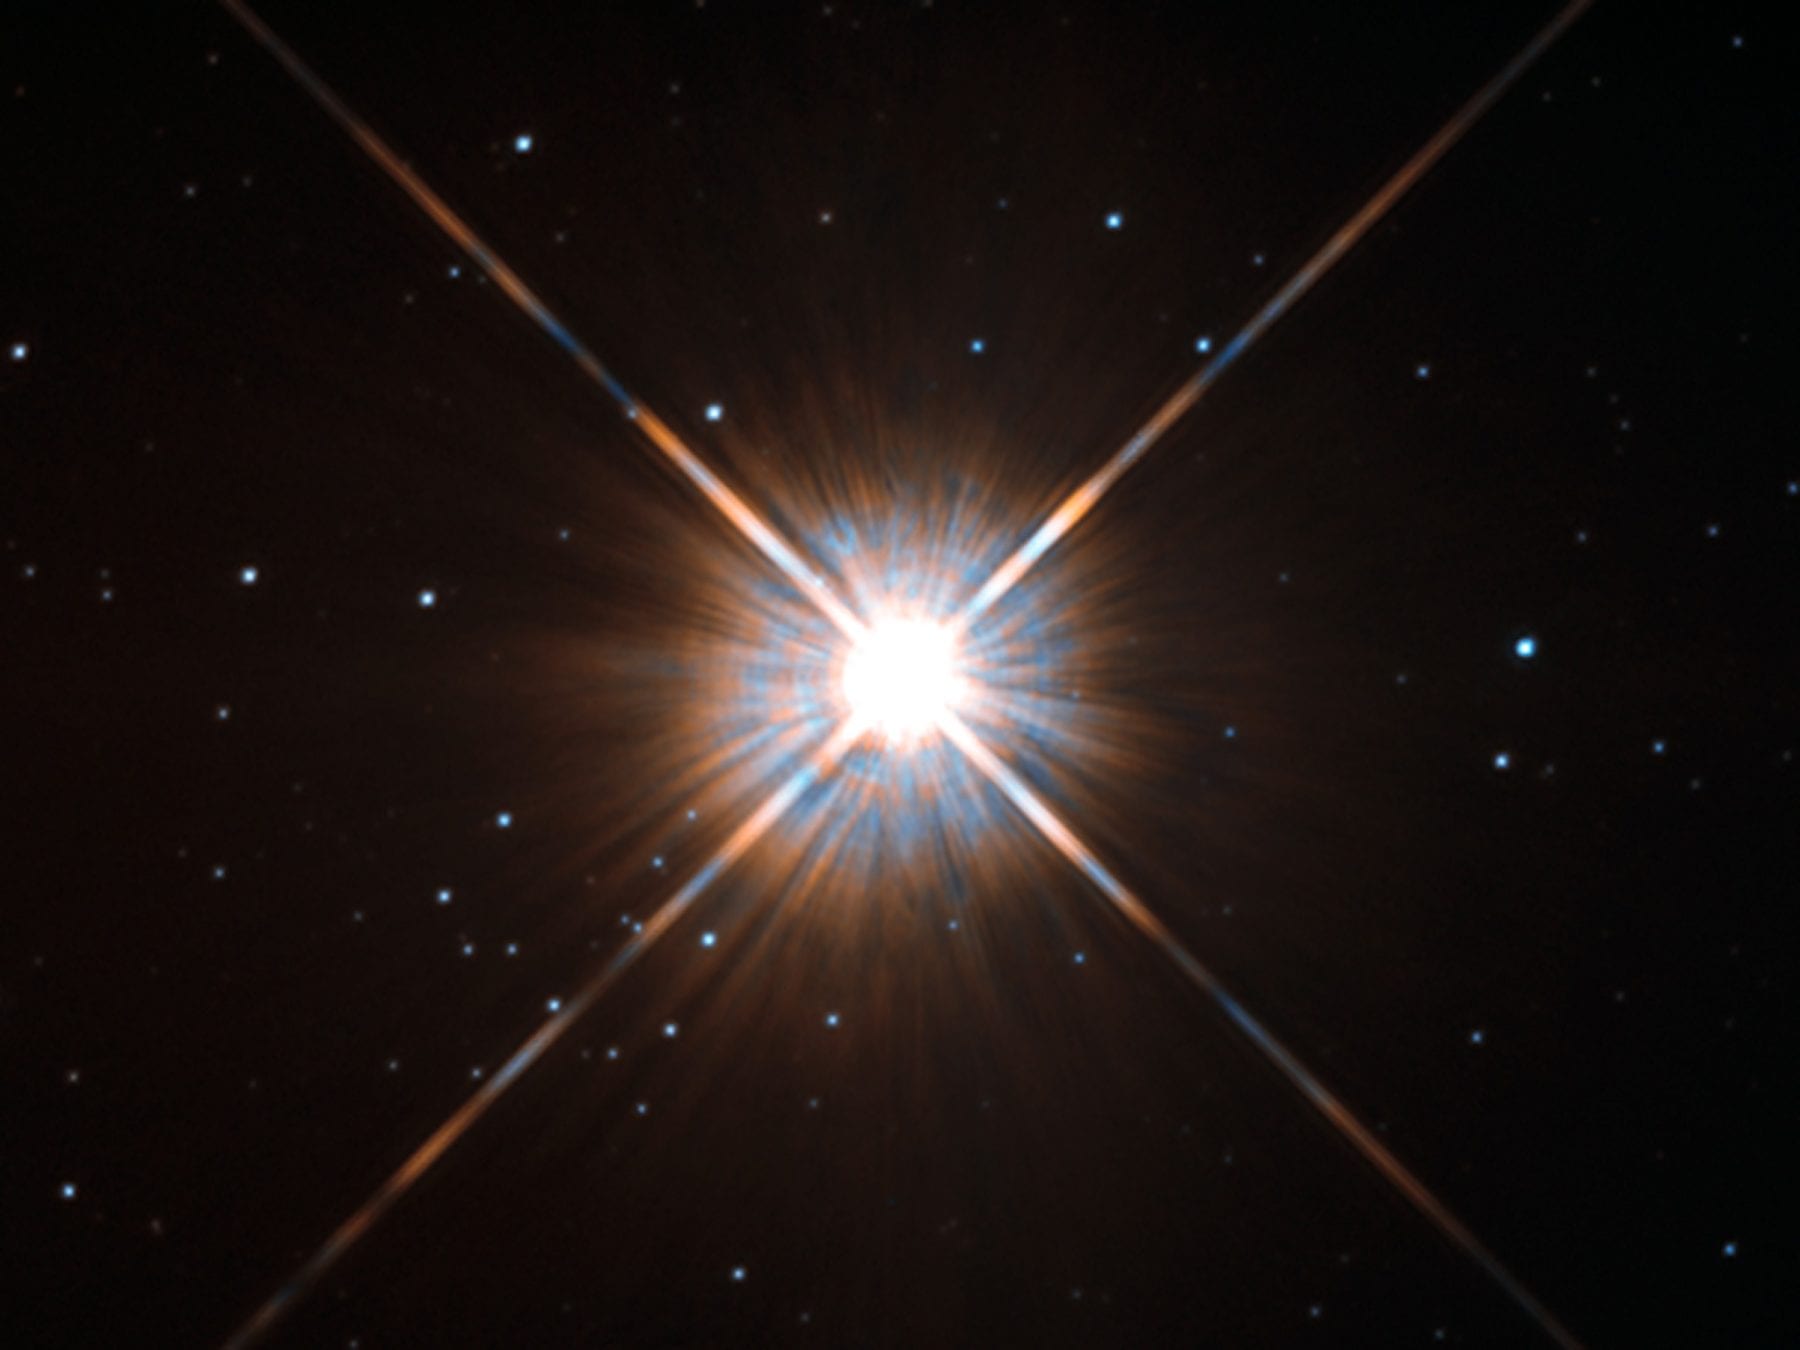 Scientists have discovered an Earth-like planet orbiting a star in our neighbourhood: Proxima Centauri